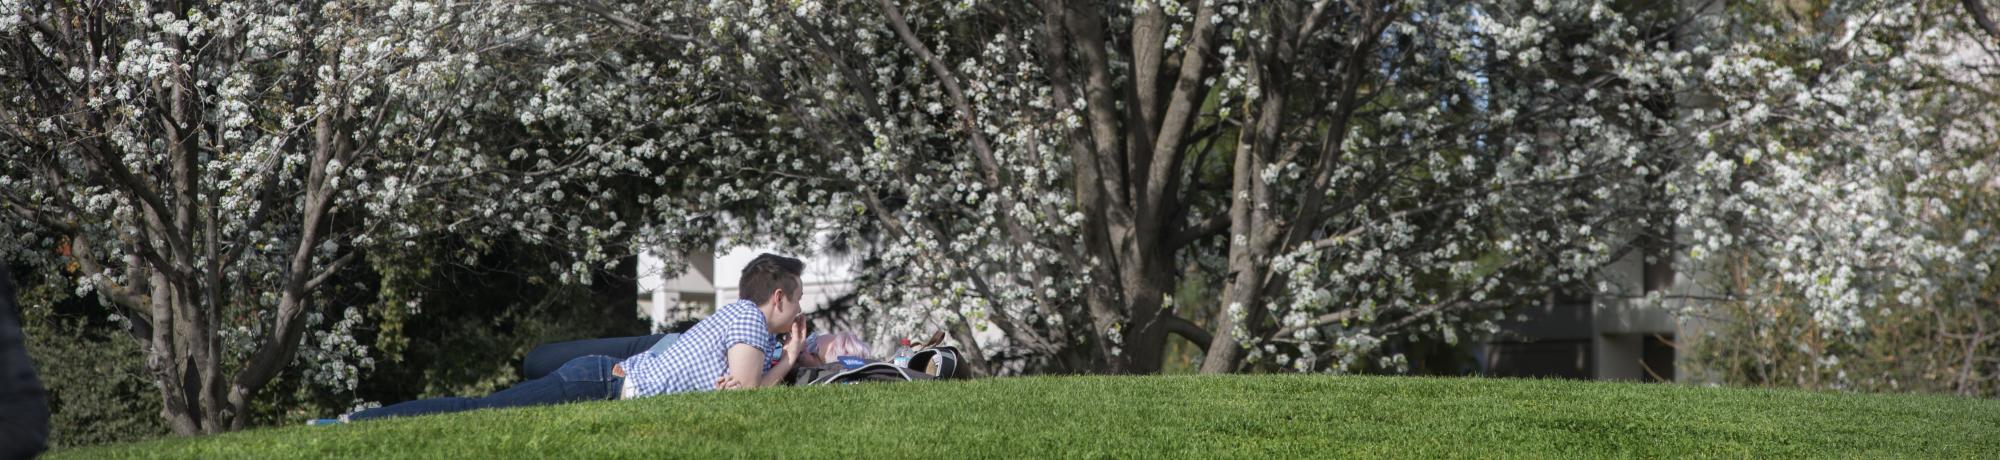 person laying on their stomach on a grassy hill with a white blossom tree in the background